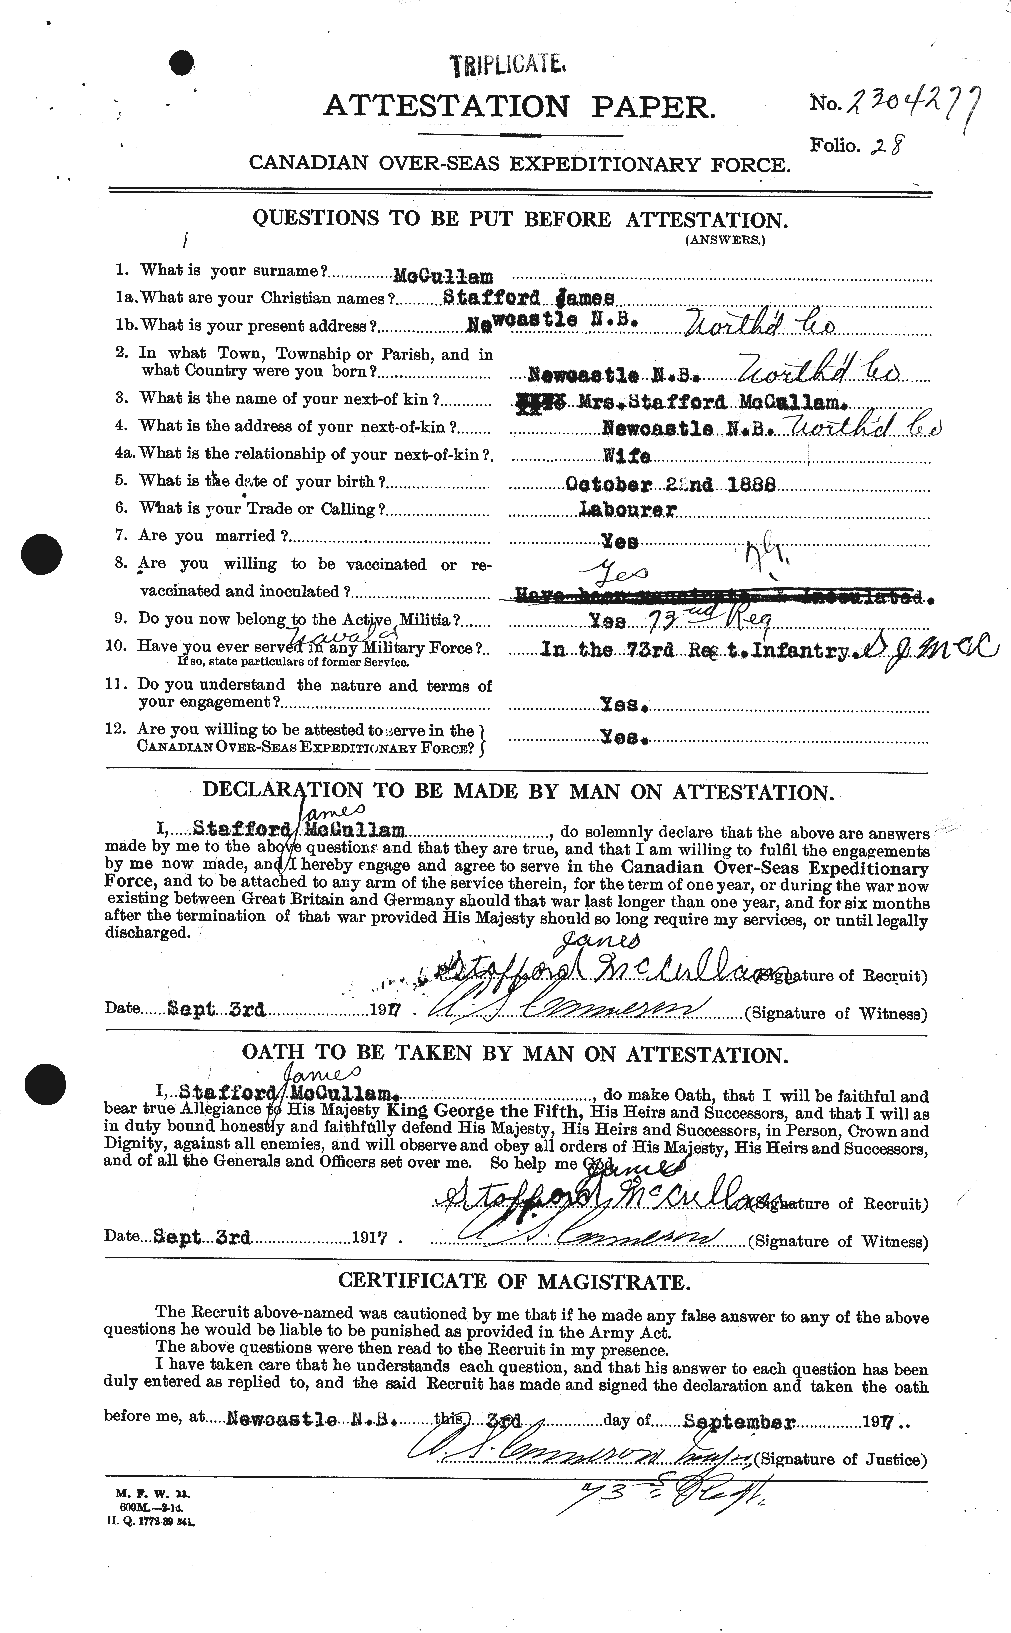 Personnel Records of the First World War - CEF 135410a